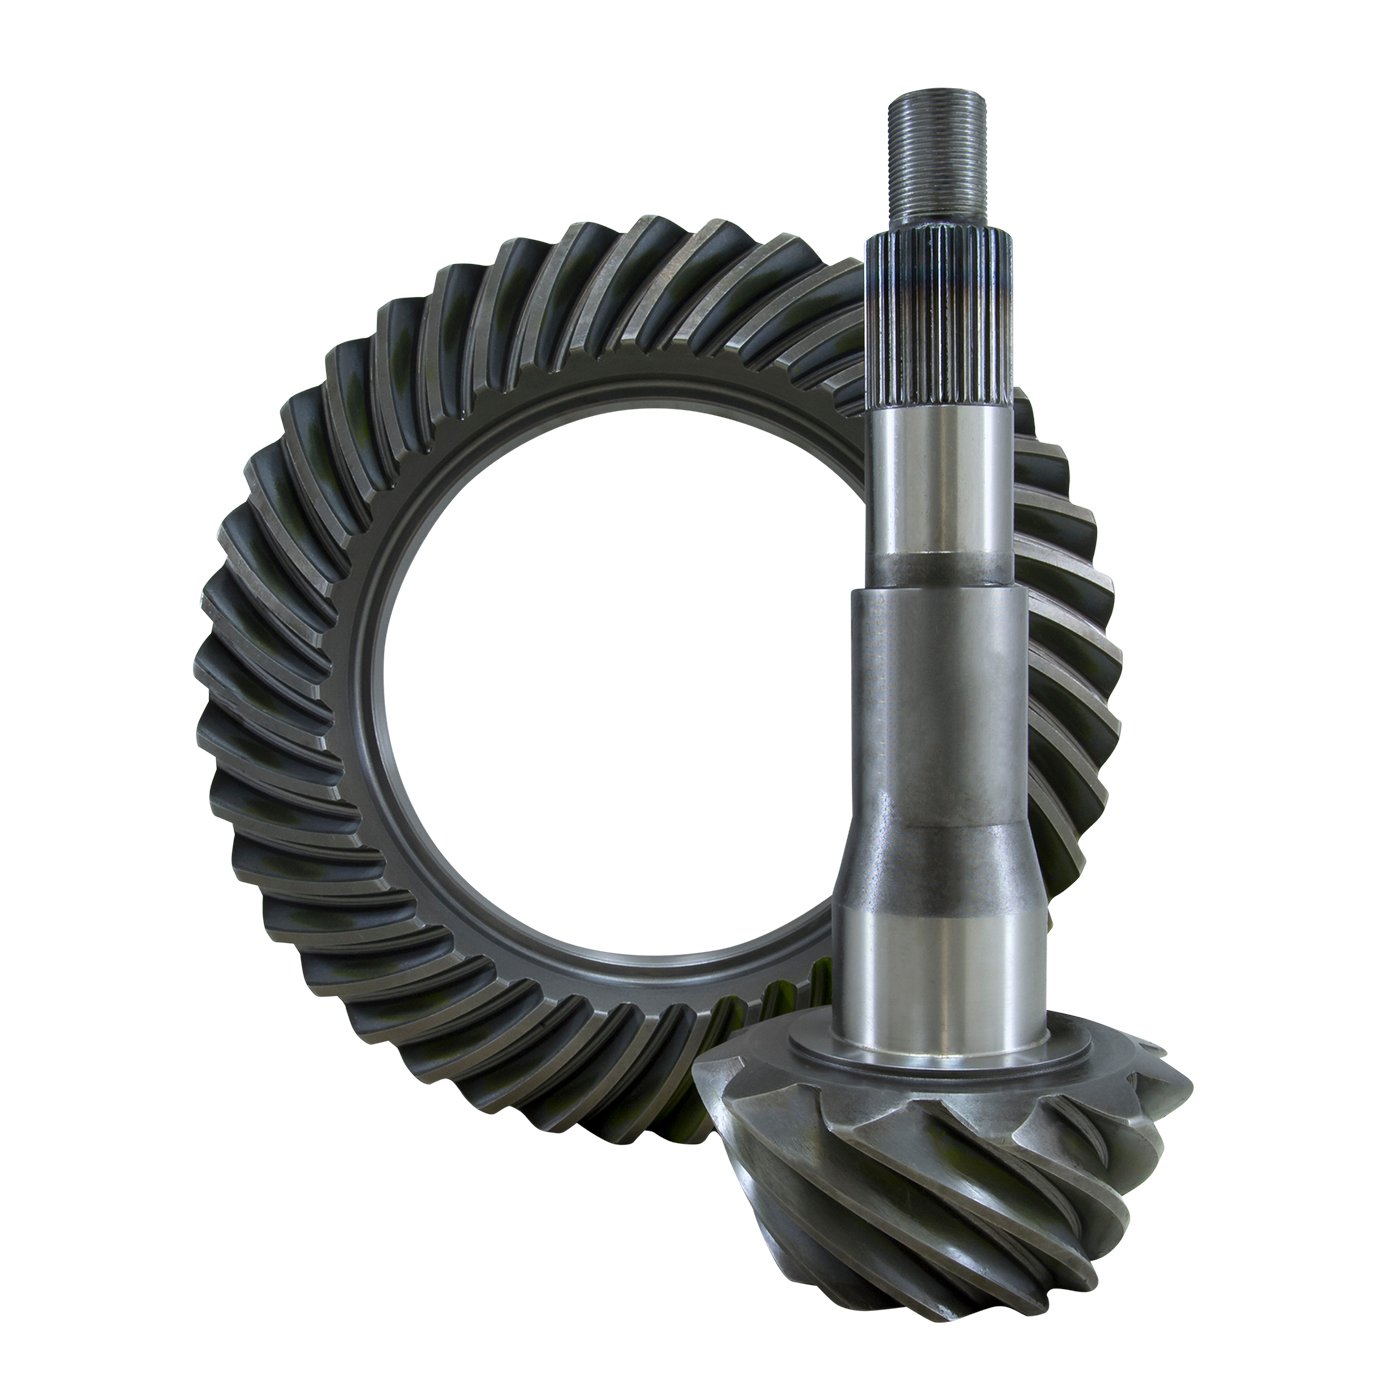 USA Standard 36272 Ring & Pinion Gear Set, For '10 & Down Ford 10.5 in., 3.55 Ratio.